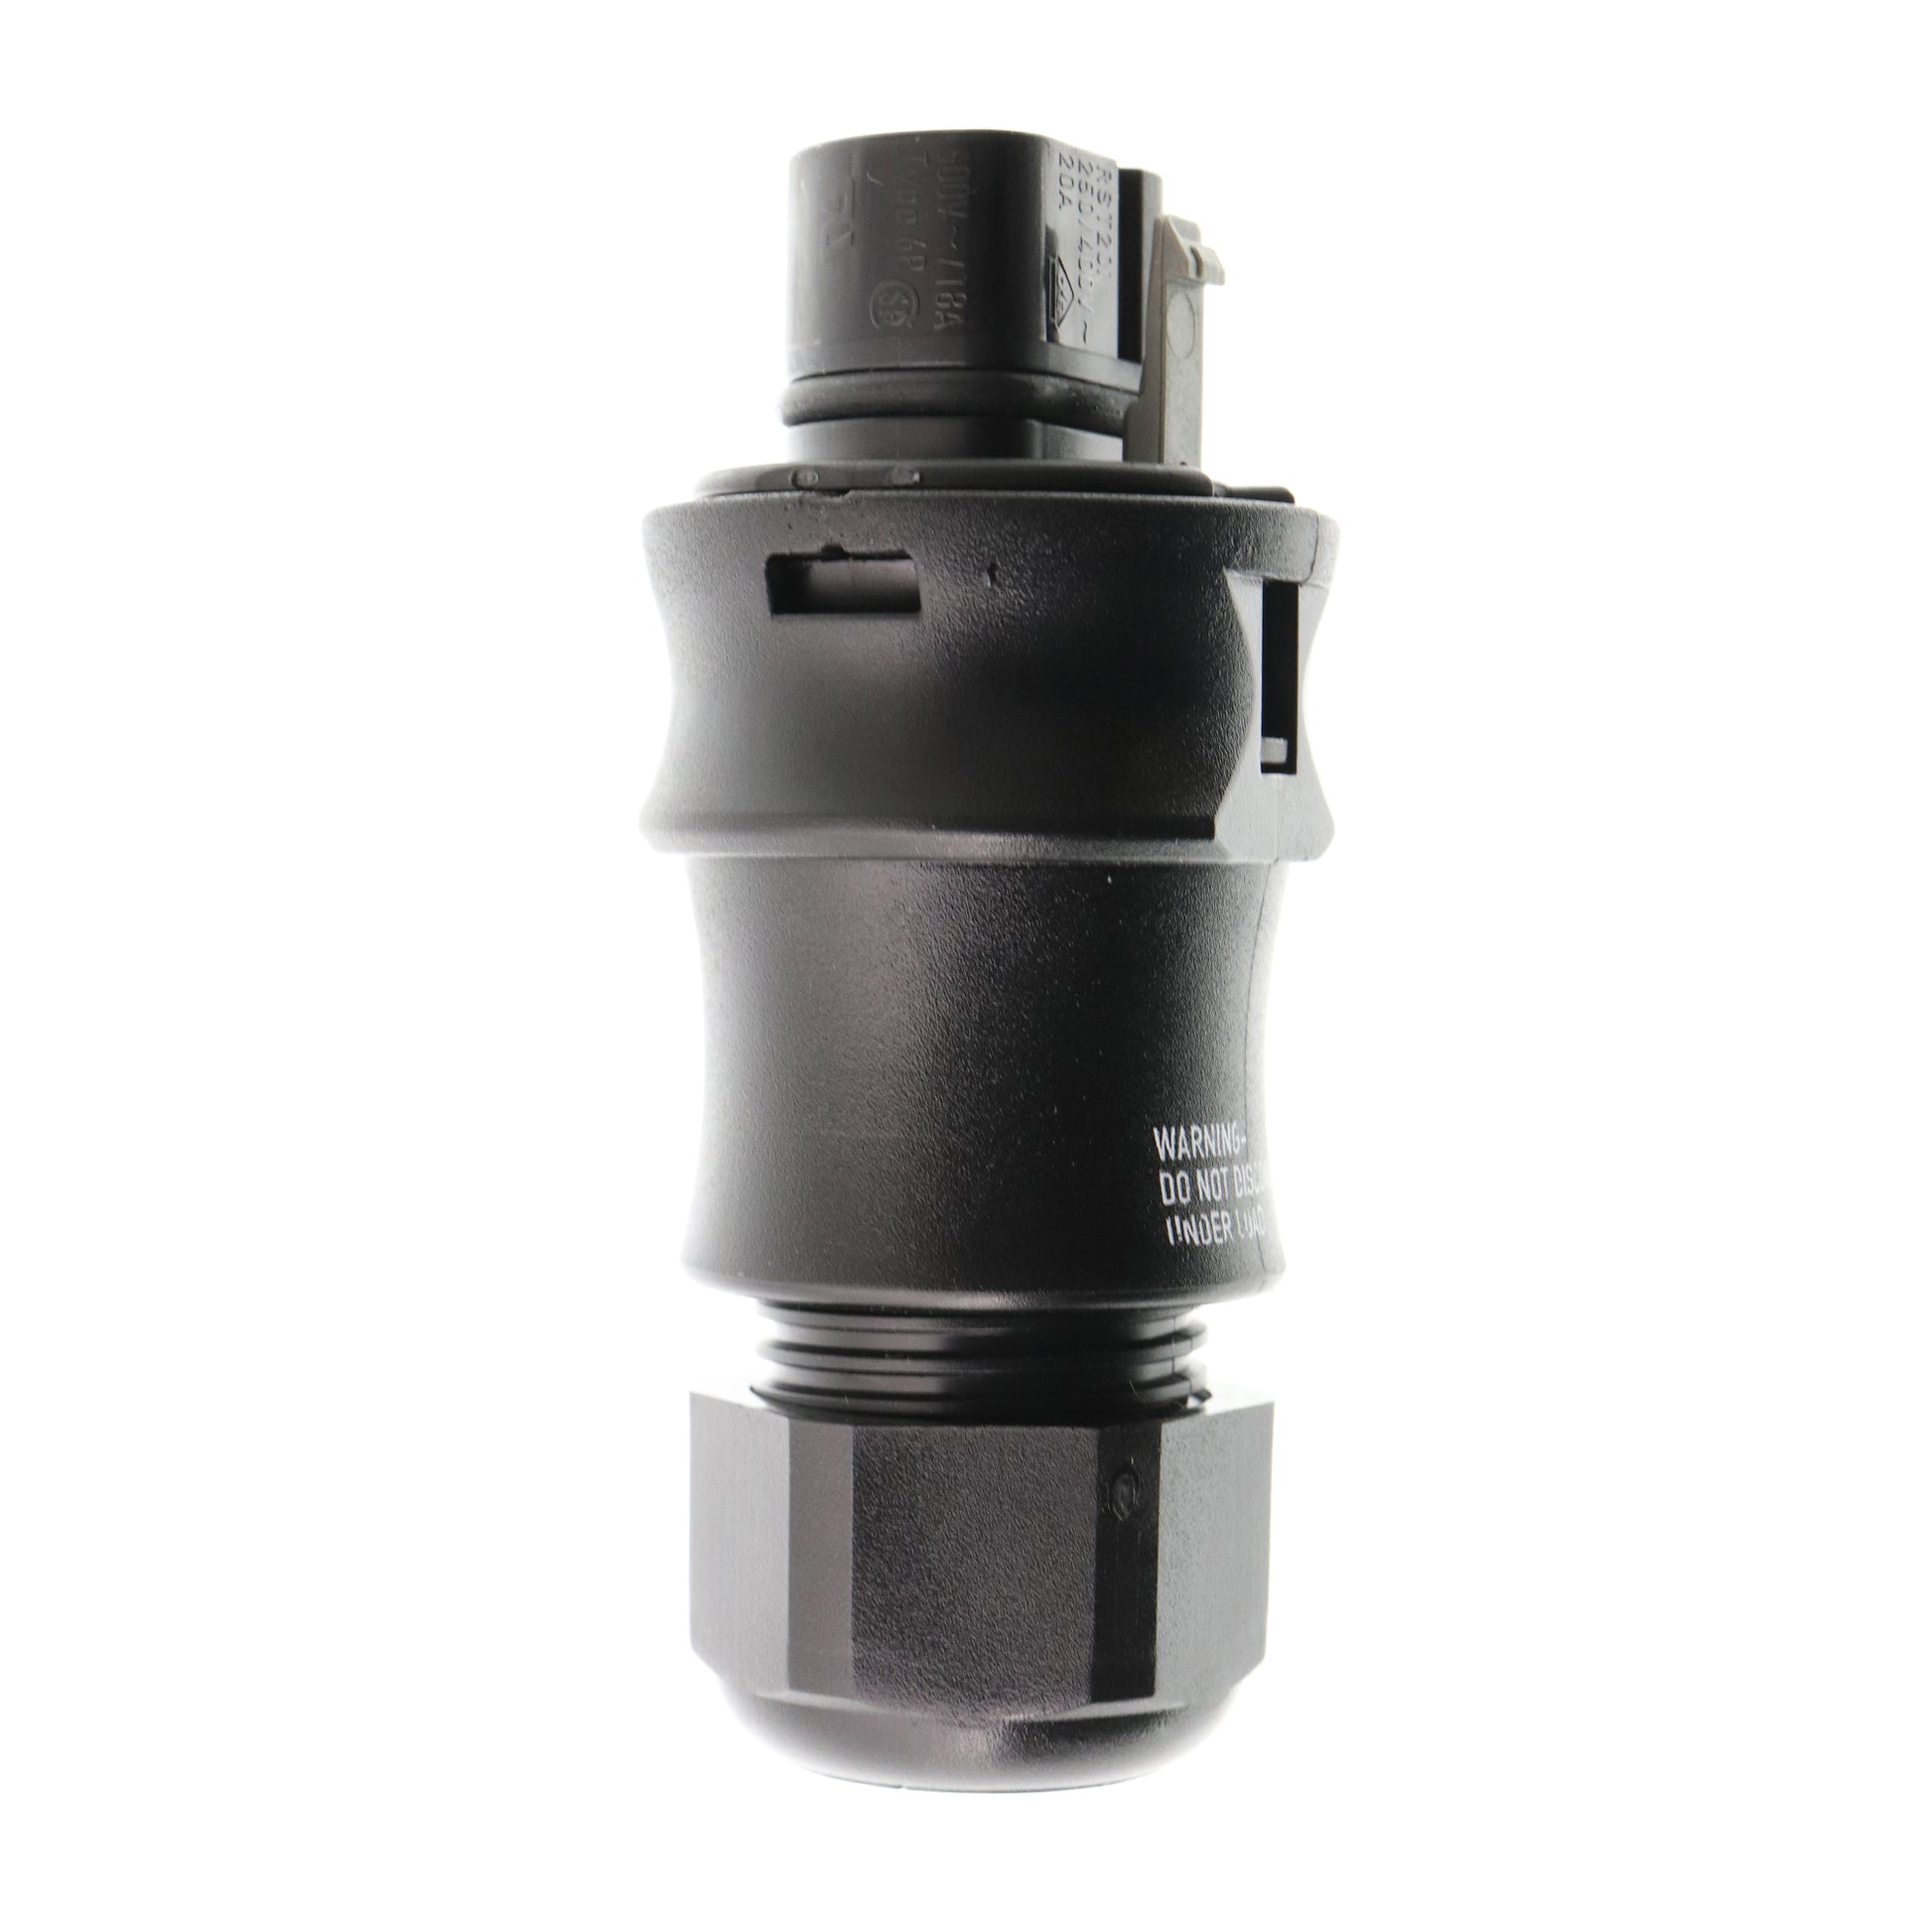 Traxon XB.AC.2302000 XB-AC Field Installable AC male Cable Connector Plug, IP66, 5-Pin, LTW-Style, Black